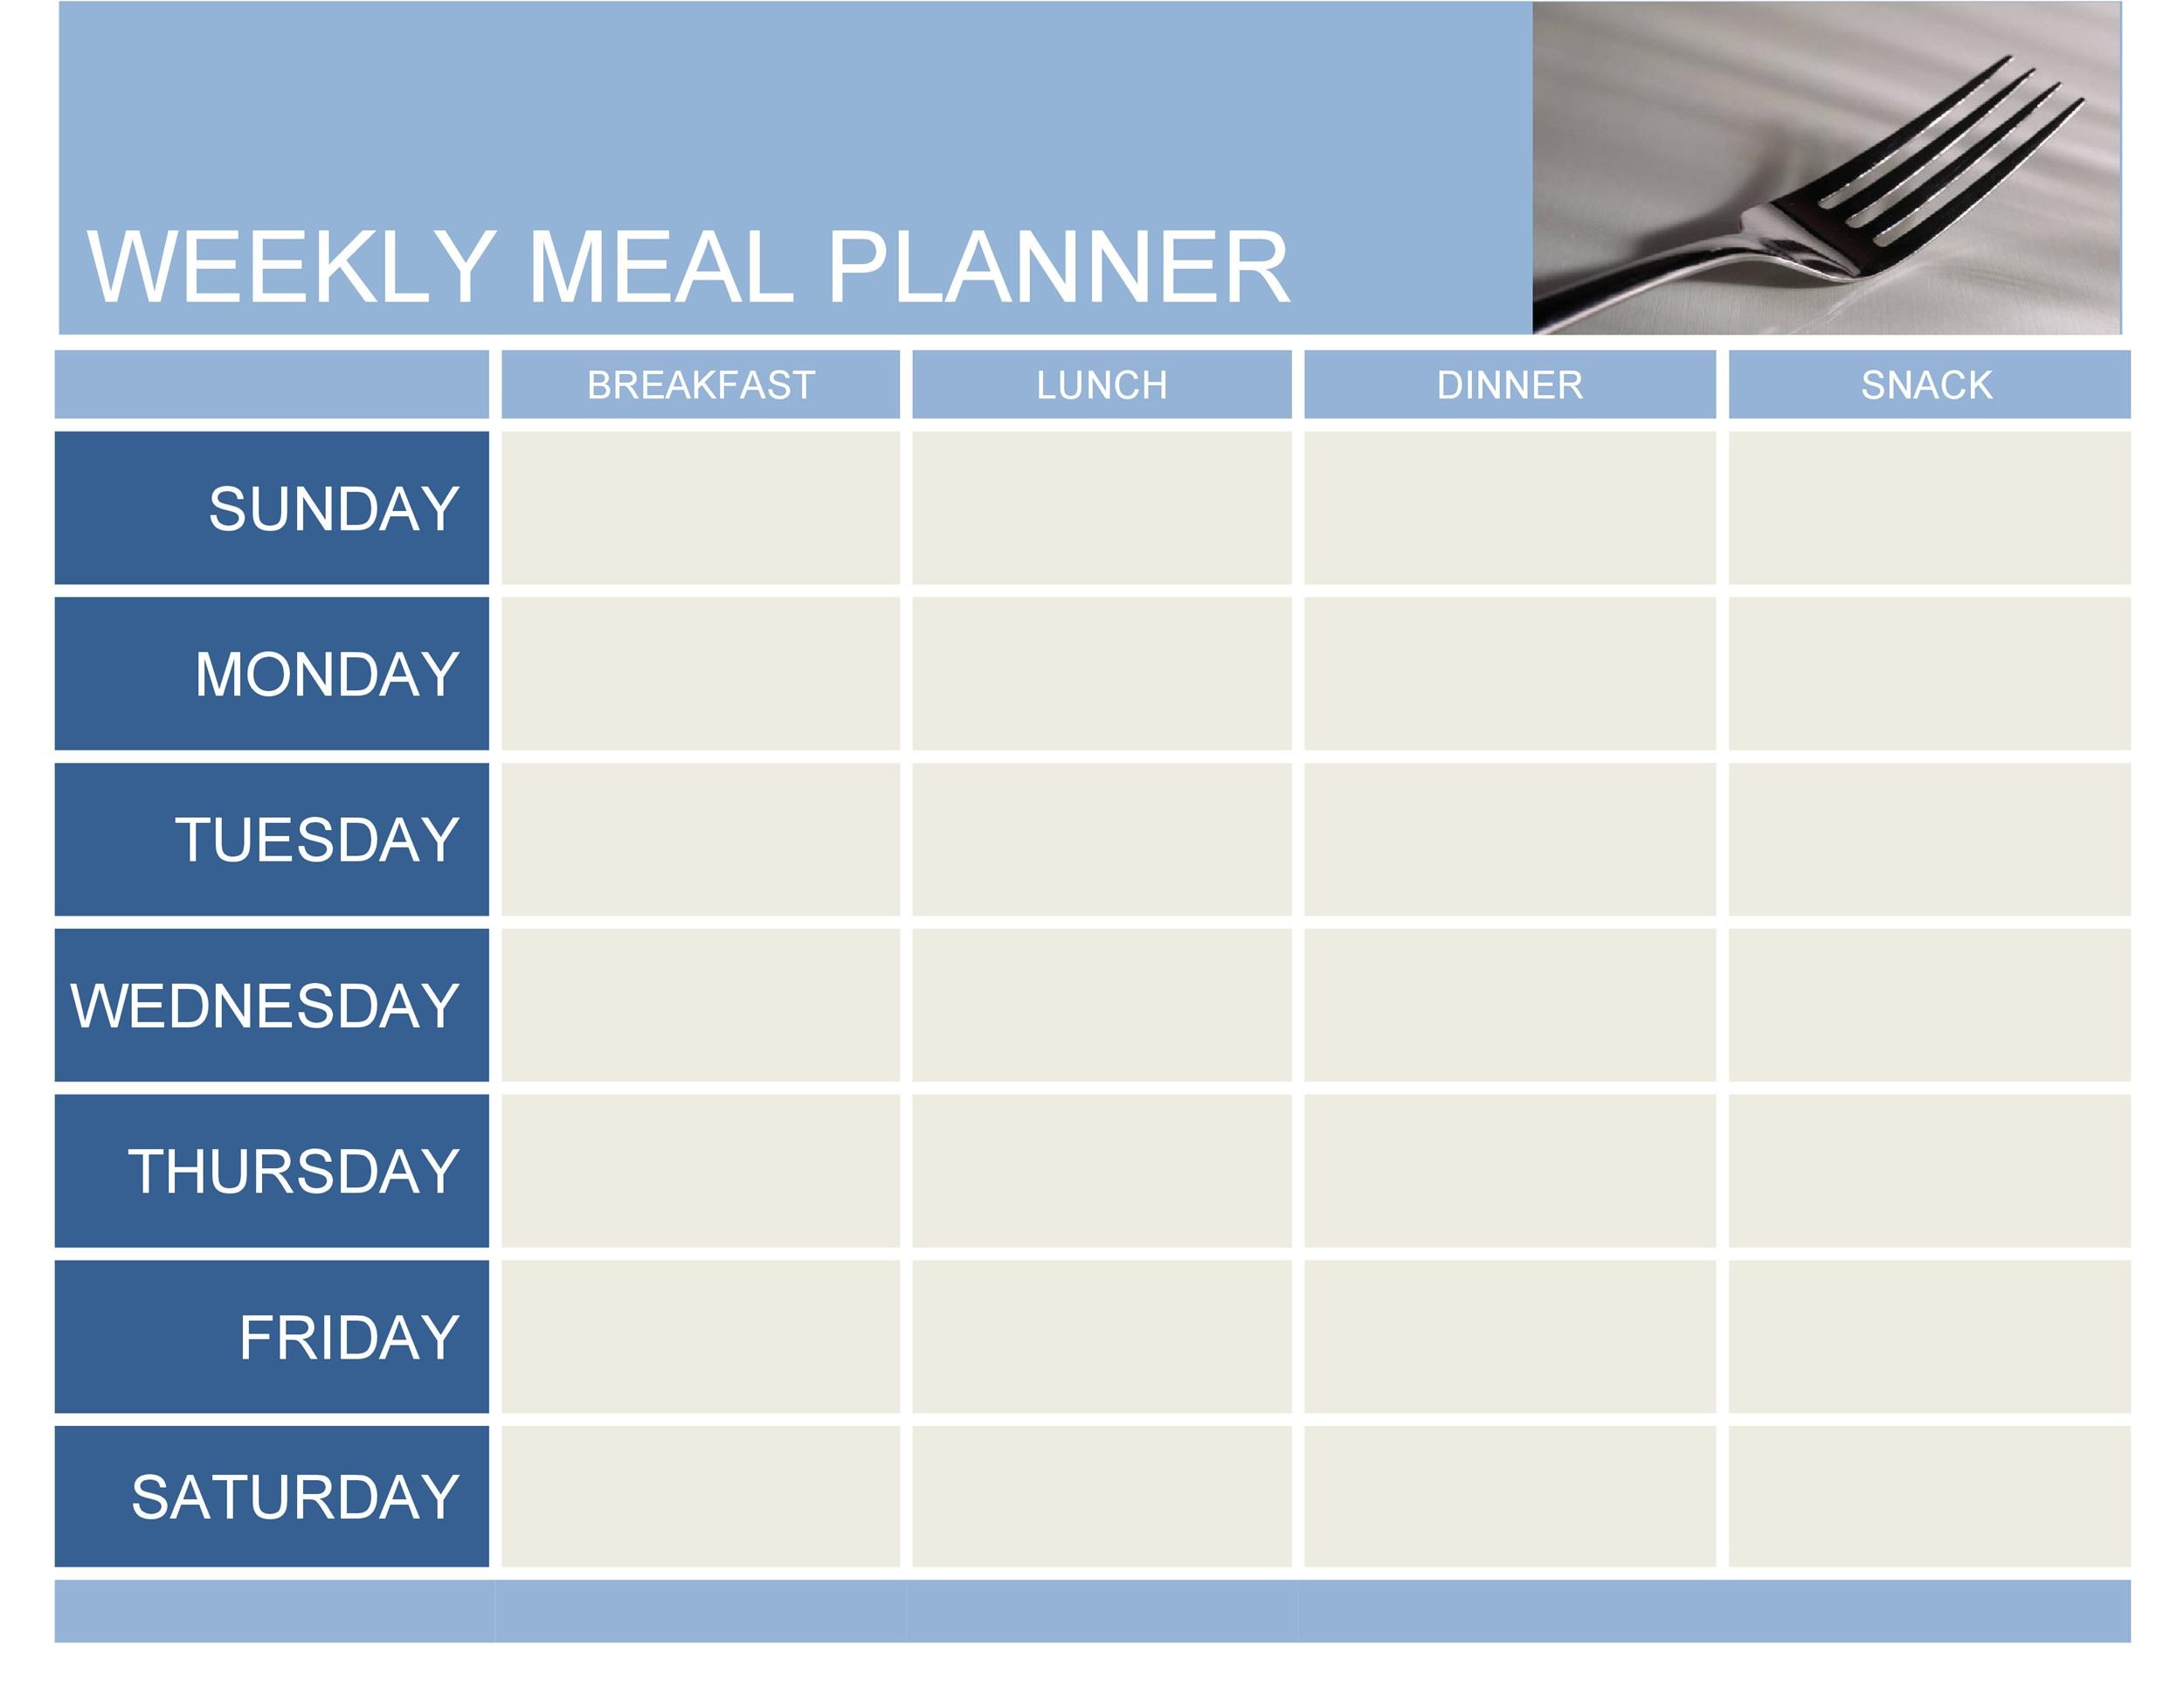 8 Weekly Meal Planner Template Excel Perfect Template Ideas 94105 Hot Sex Picture